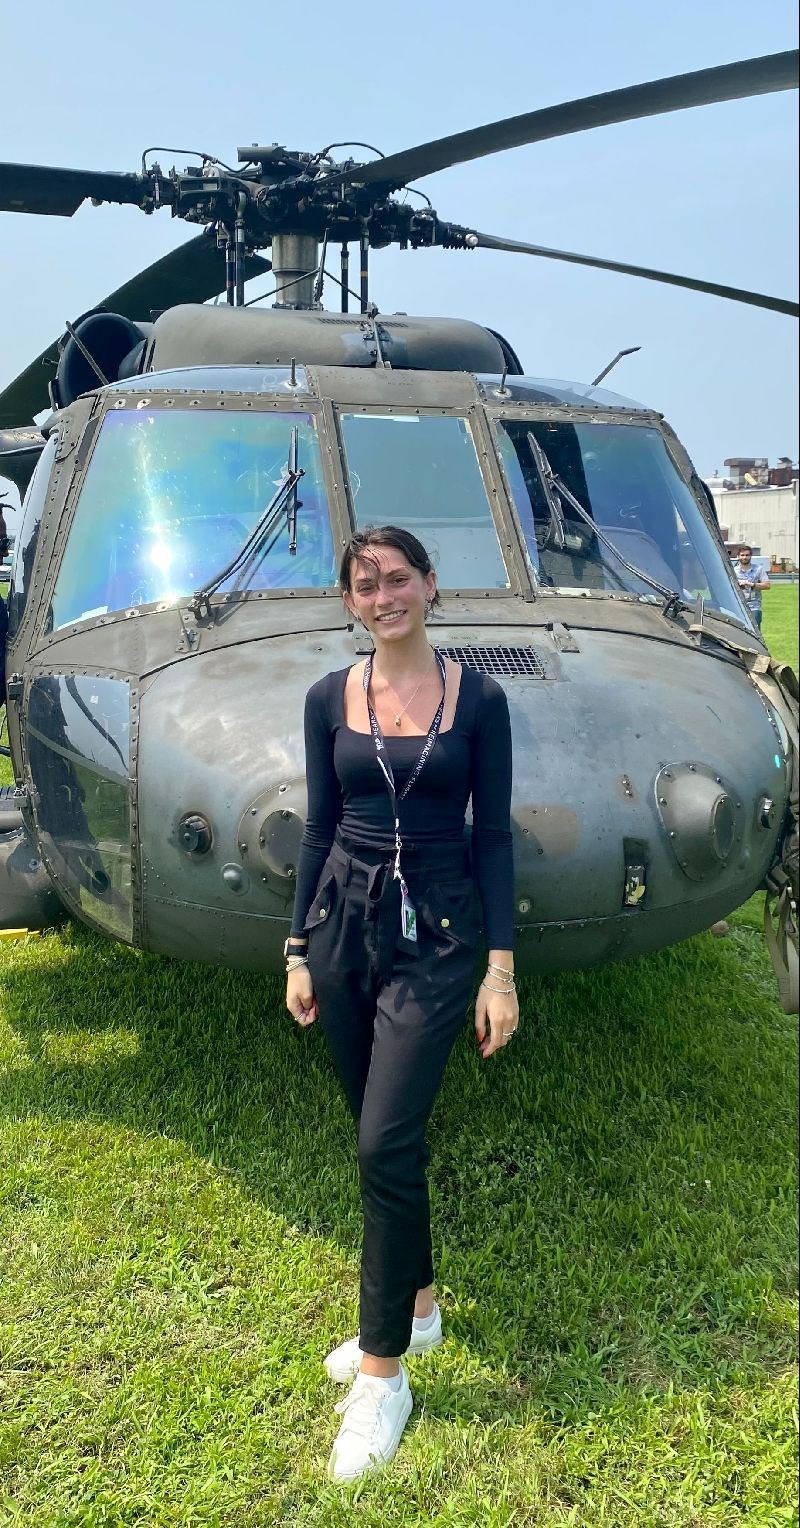 Alinna Hanna in front of a helicopter